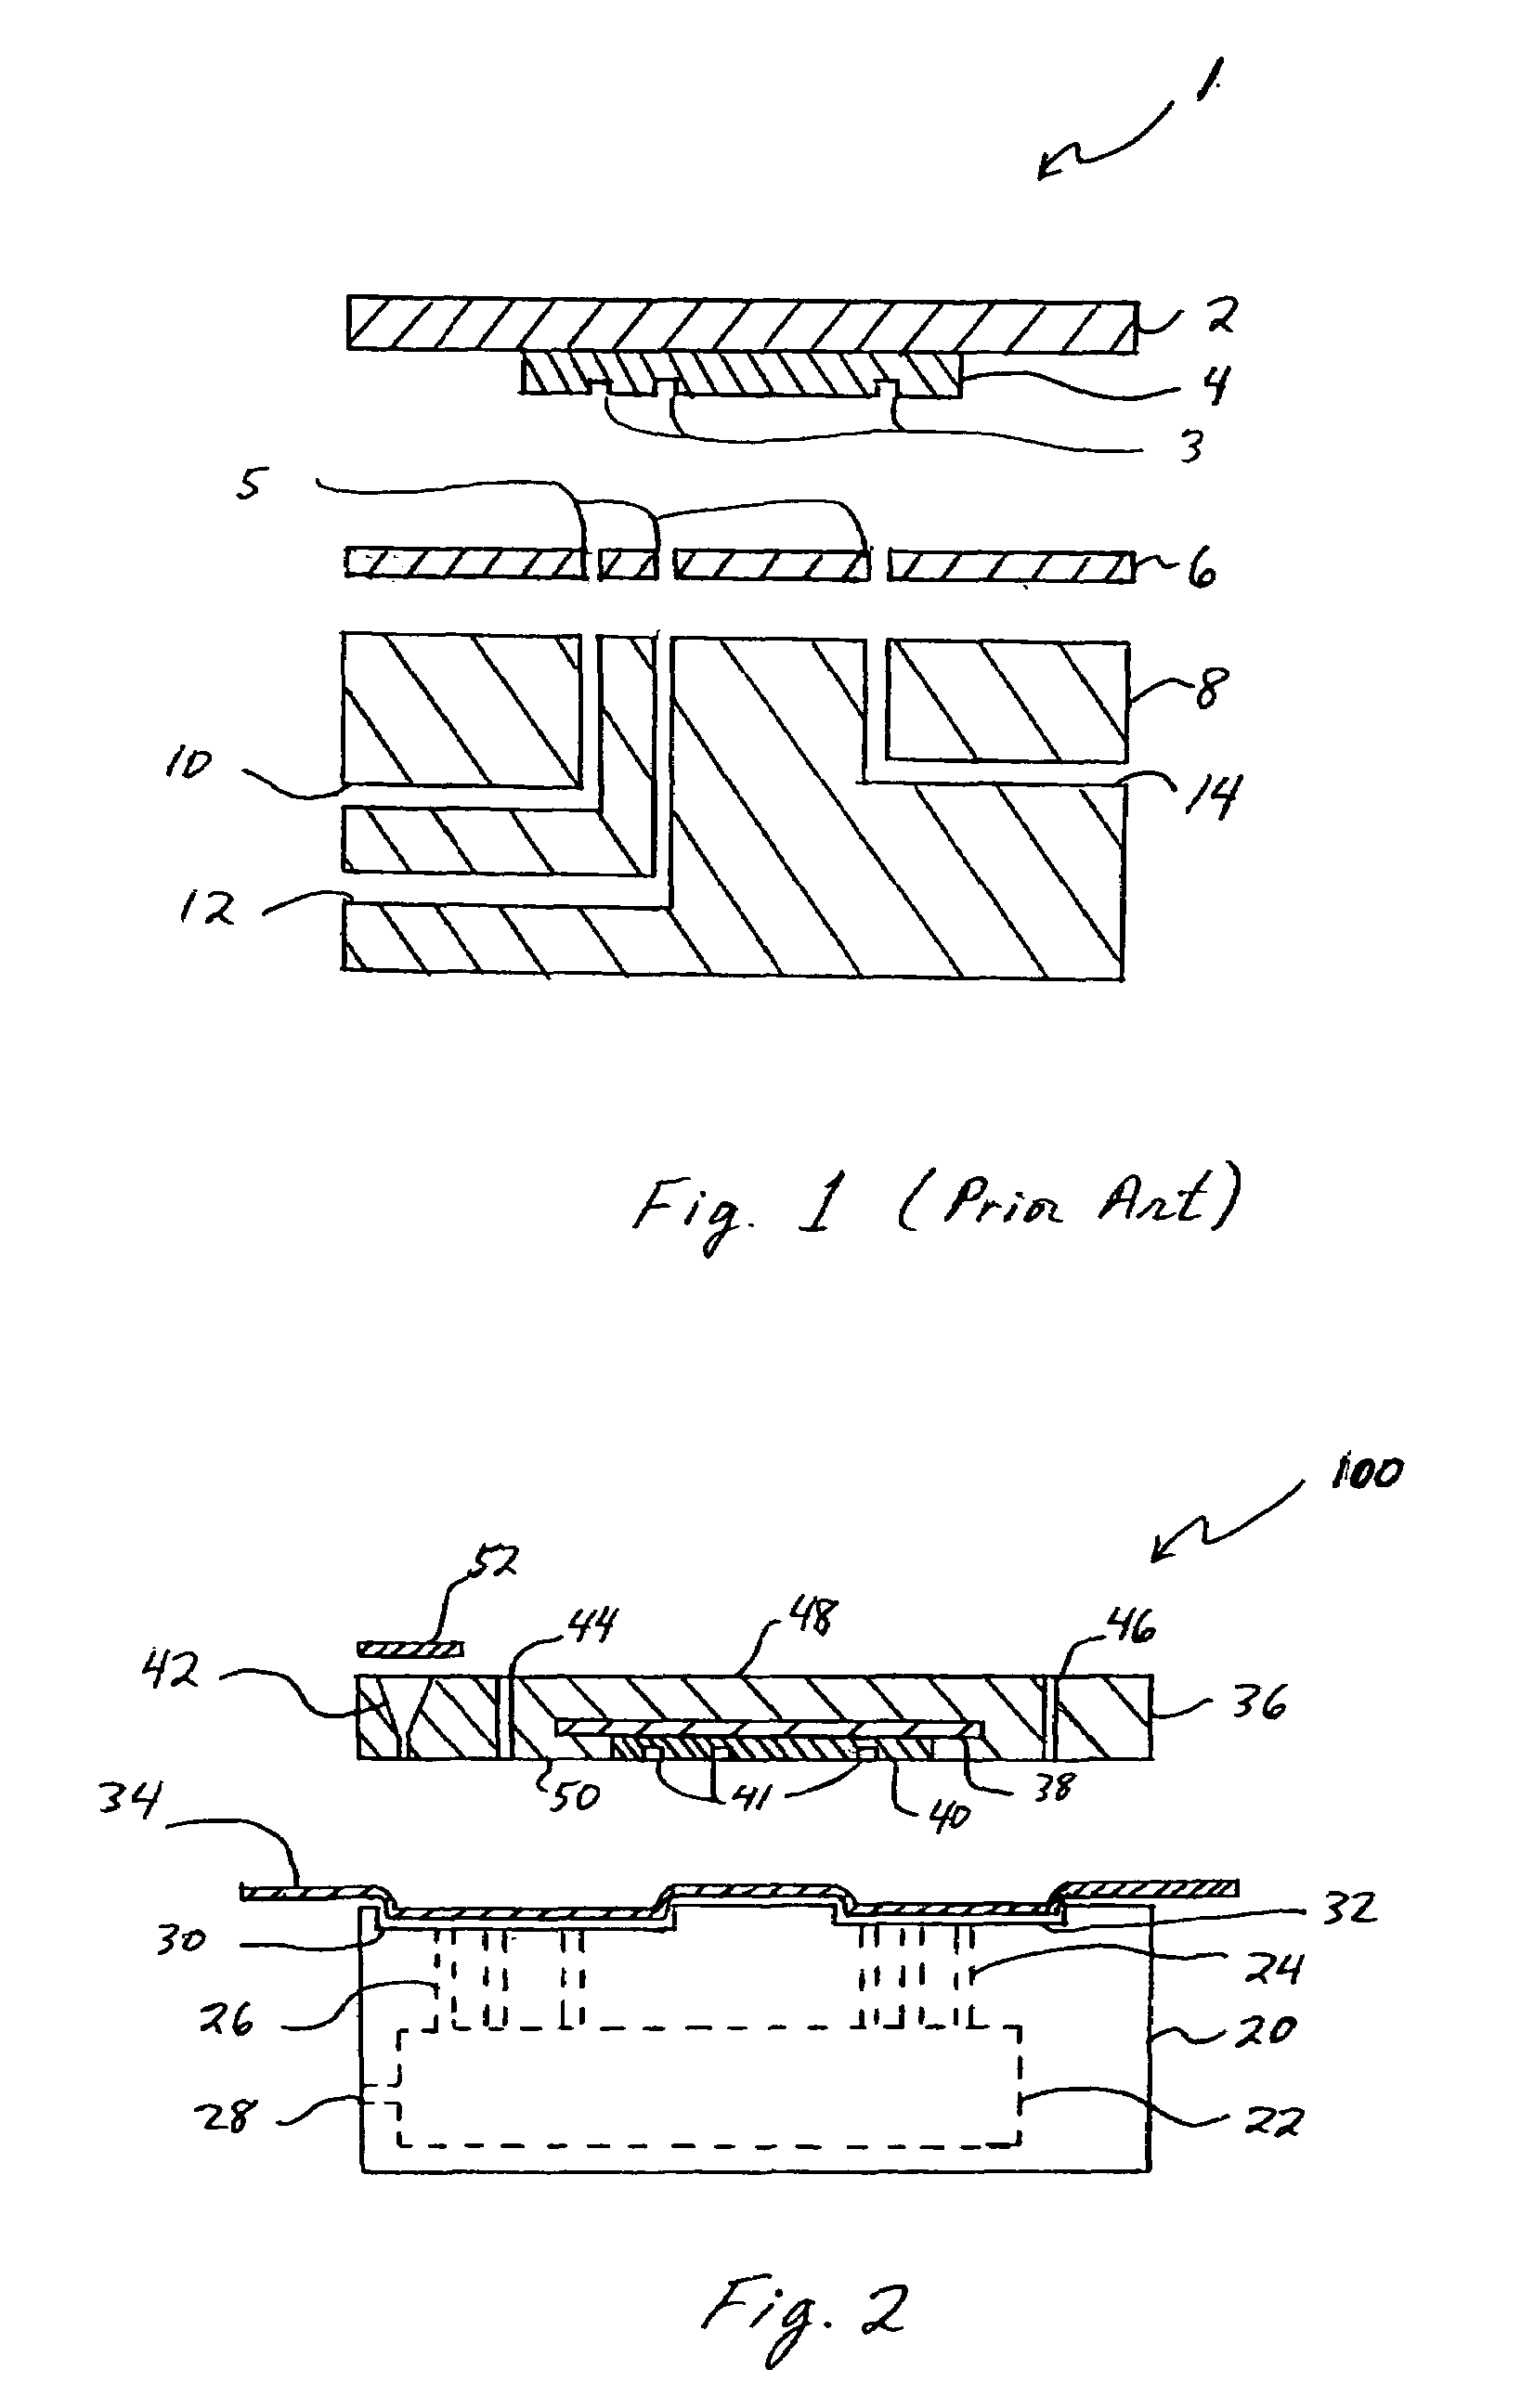 Microfluidics packages and methods of using same